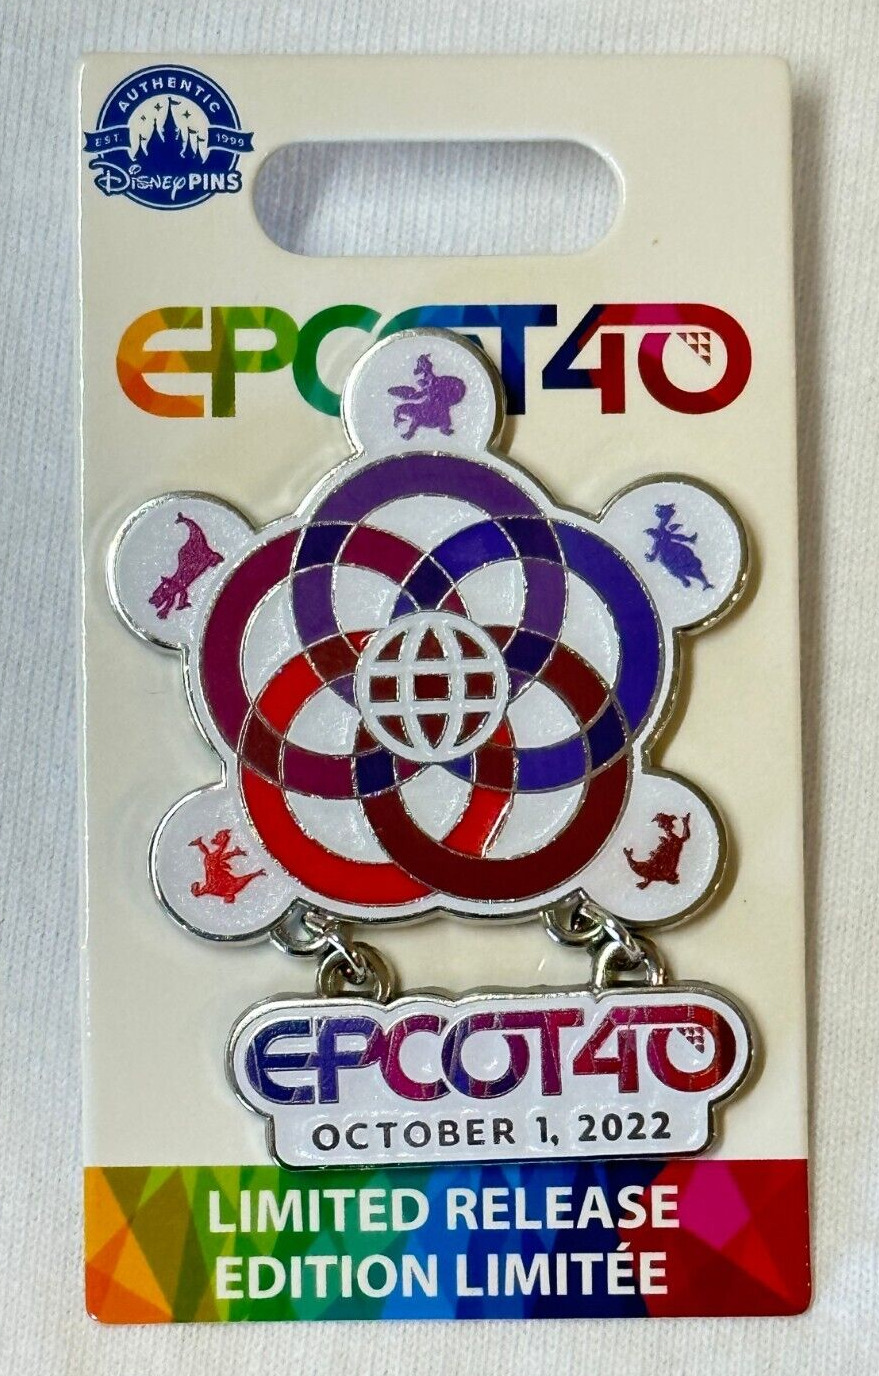 Disney World October 1st 2022 Epcot 40th Anniversary LR Pin Date Day of